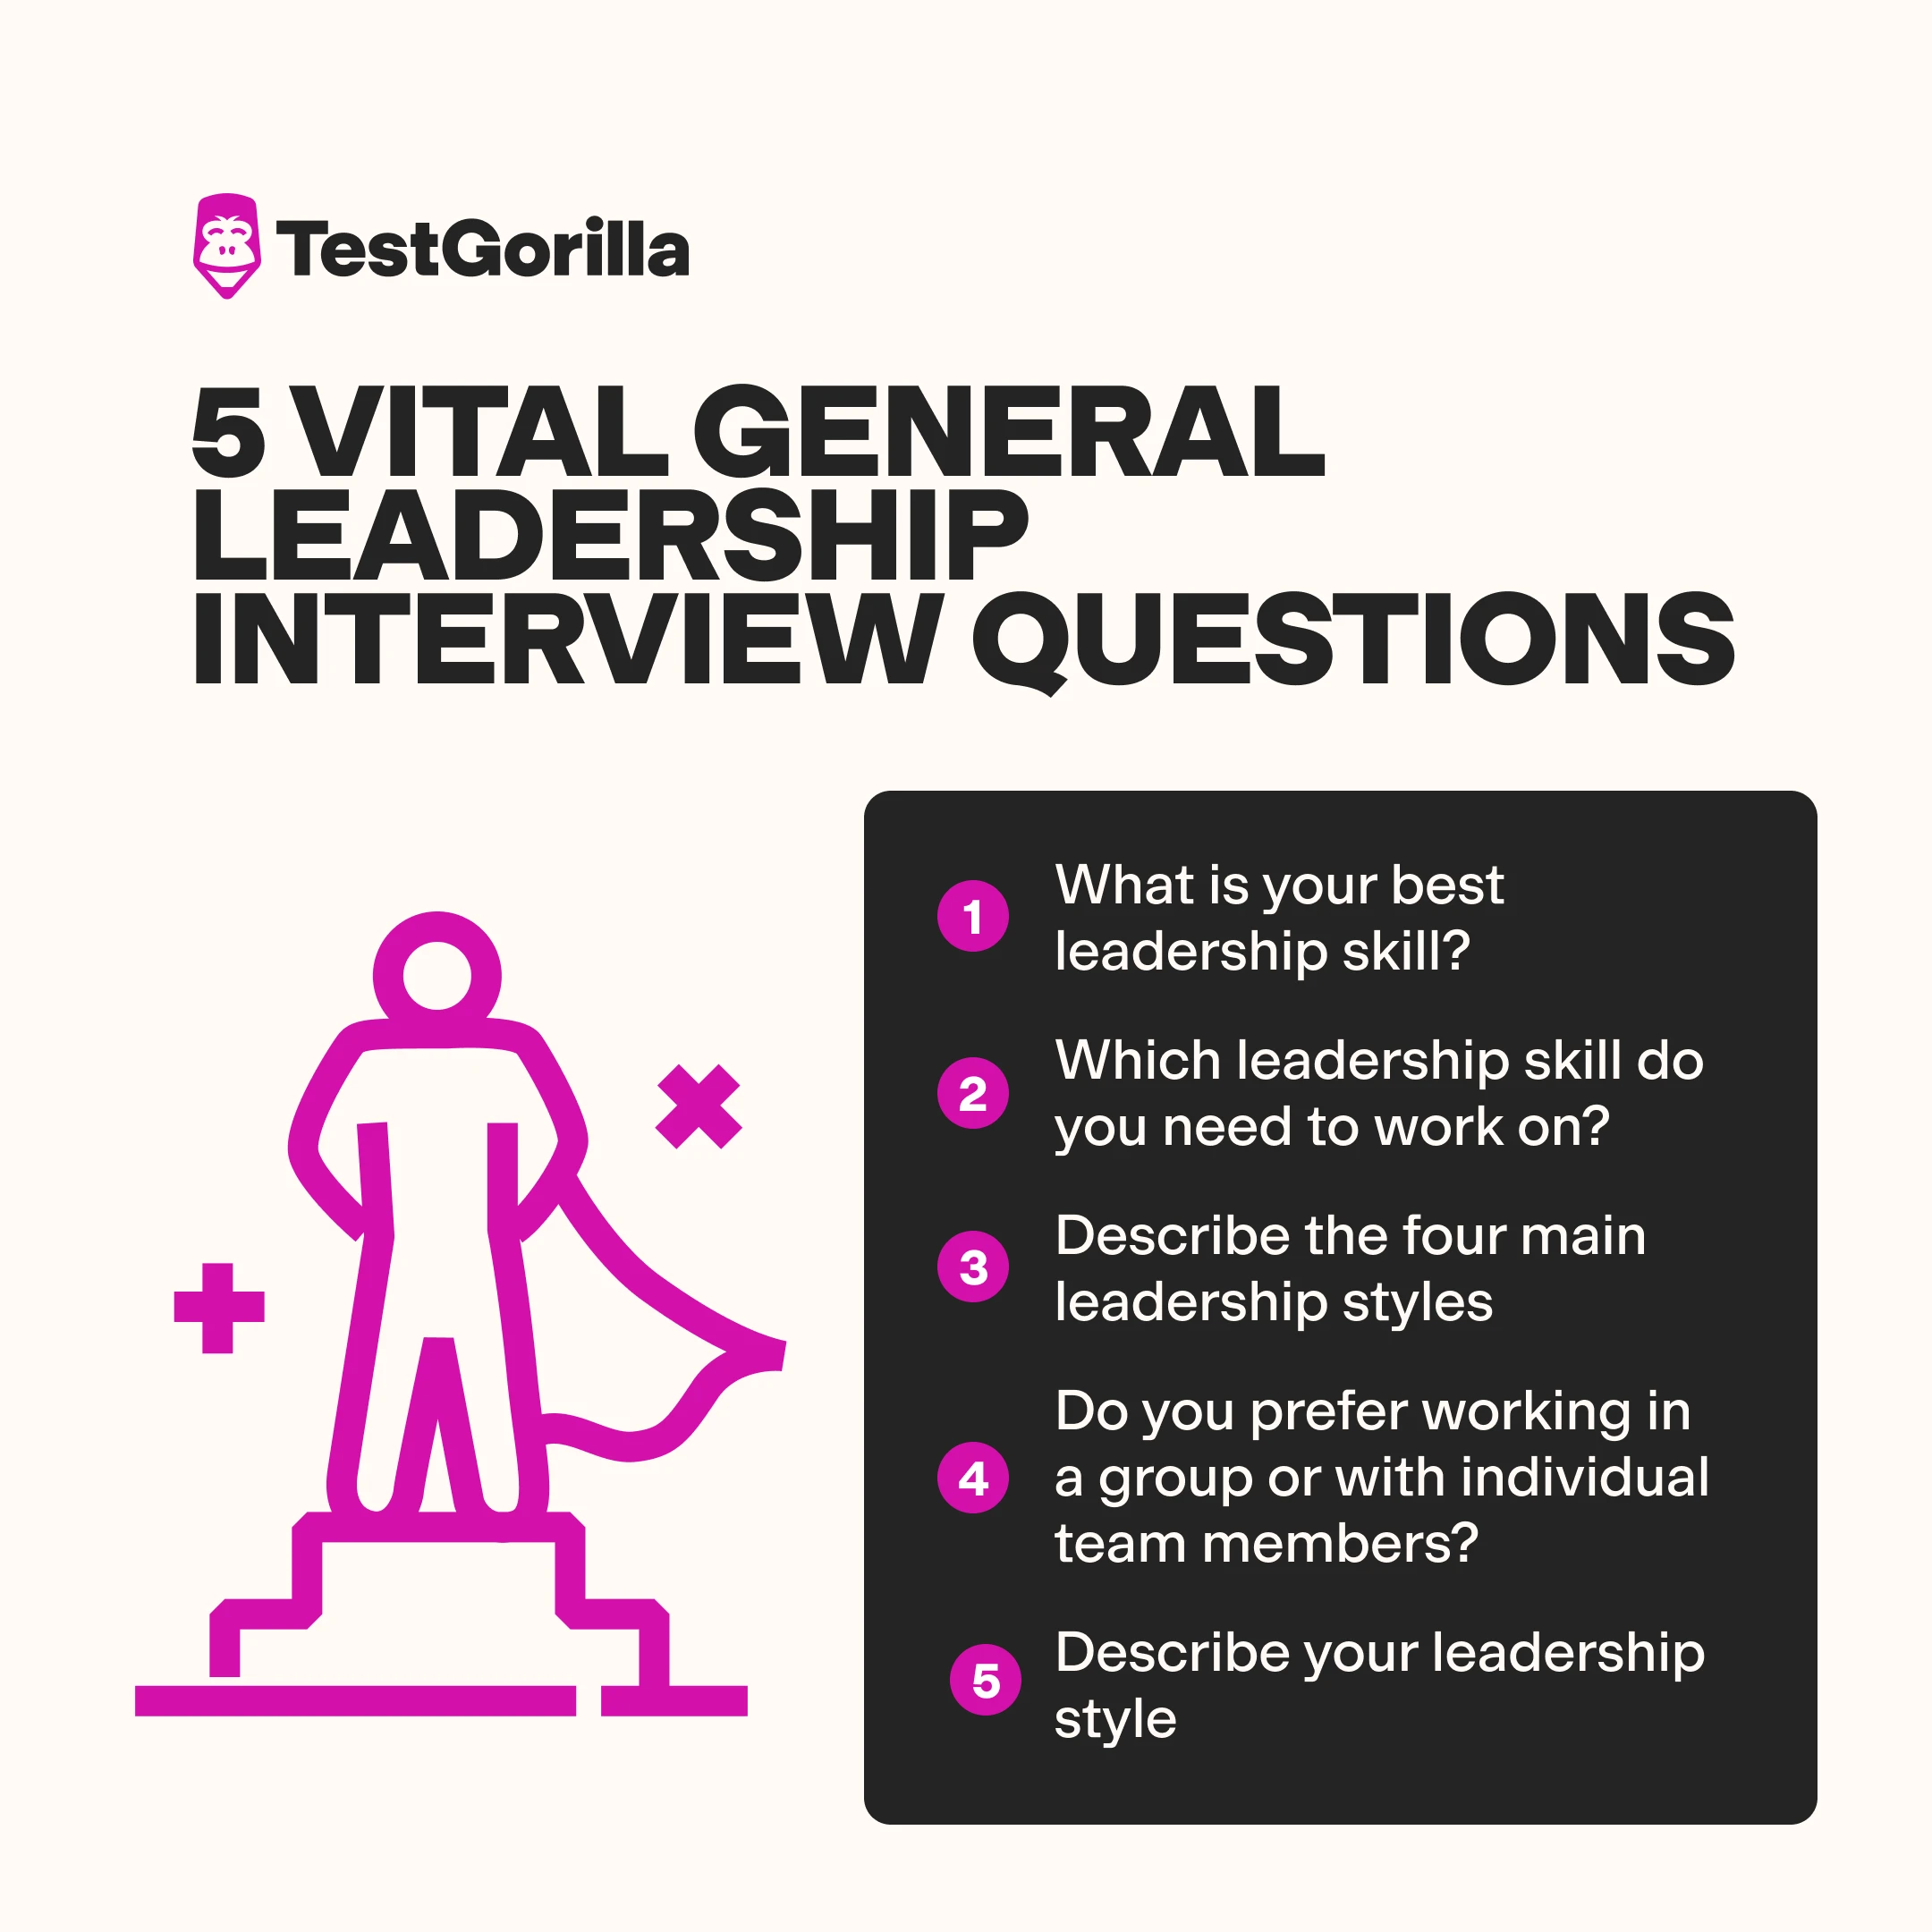 5 vital general leadership interview questions